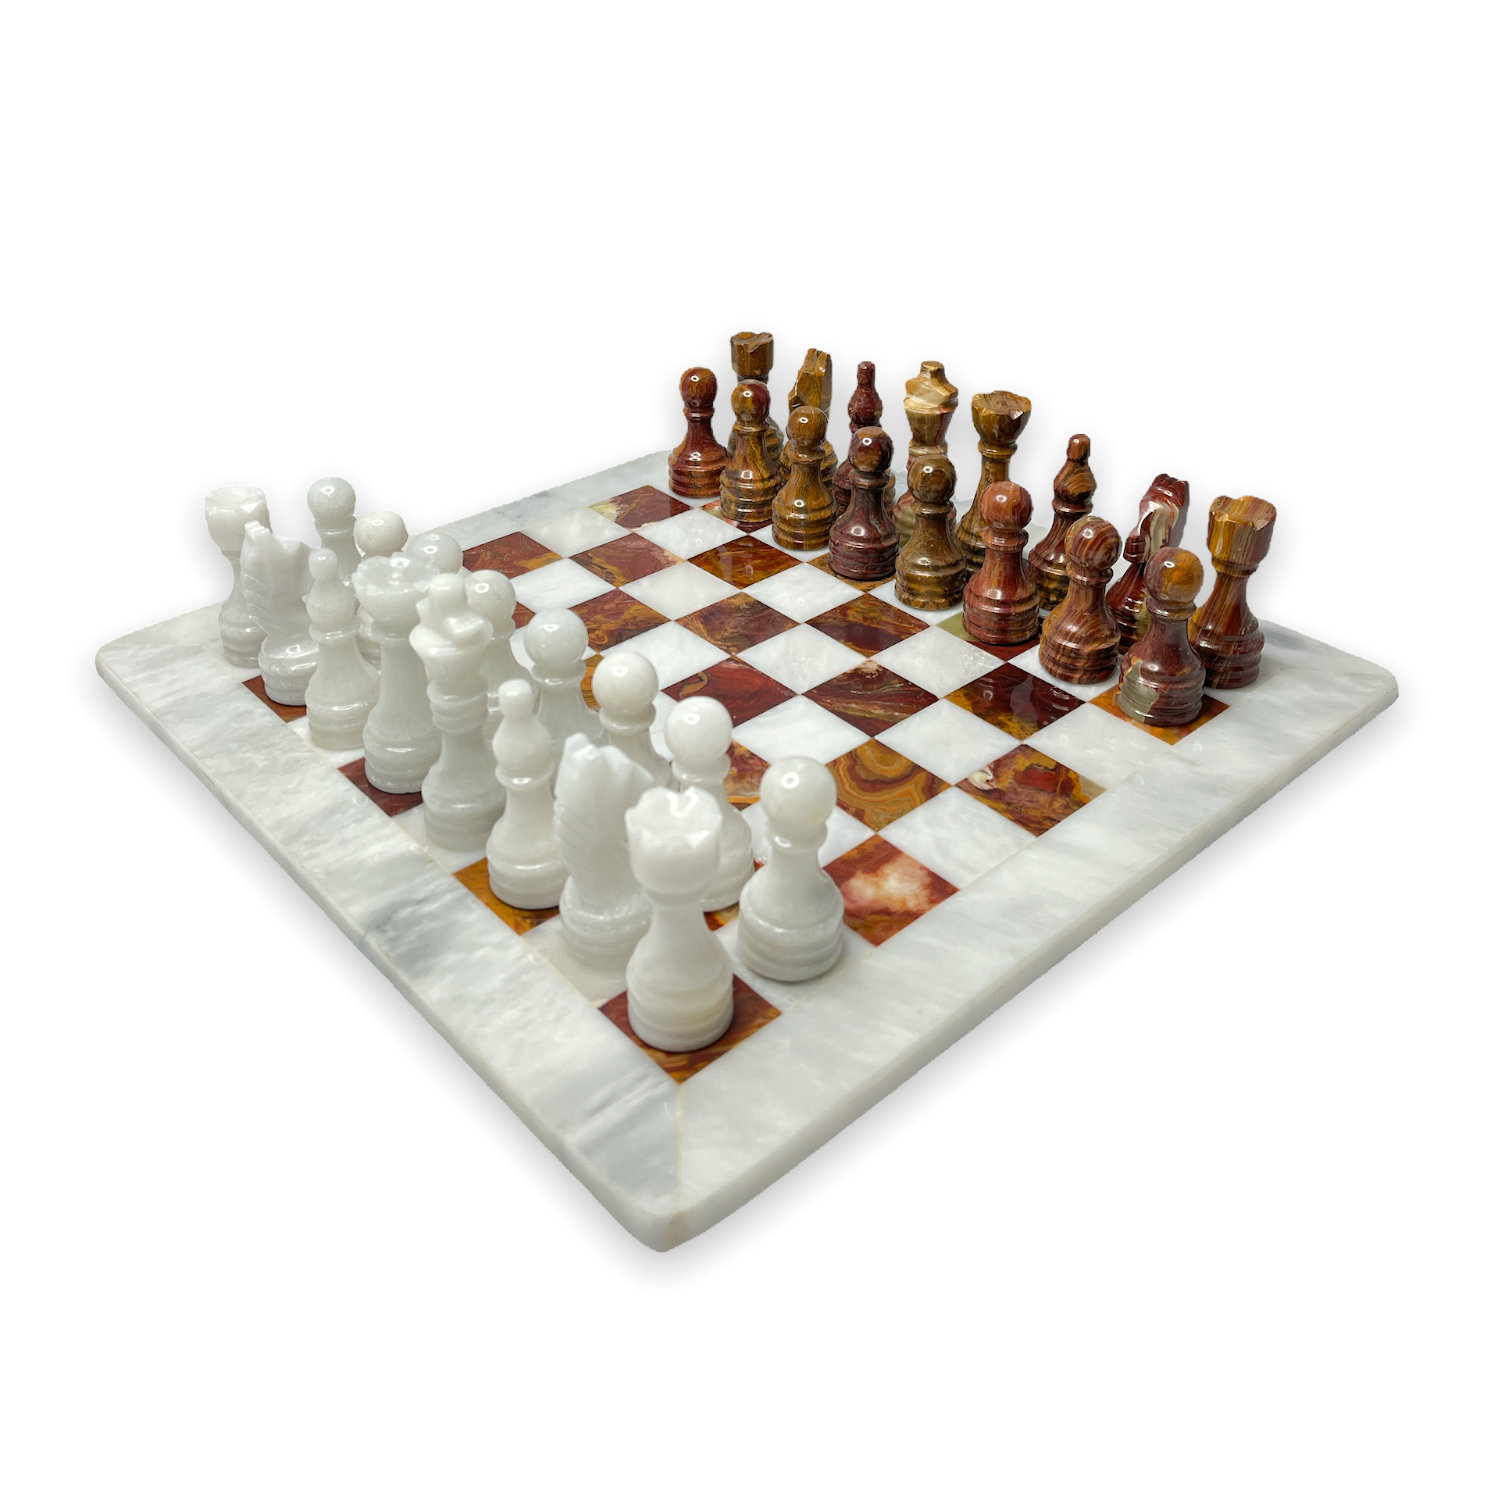 Staunton 43cm x 43cm High Quality Only Leather Standard Chess Board Game Brown 